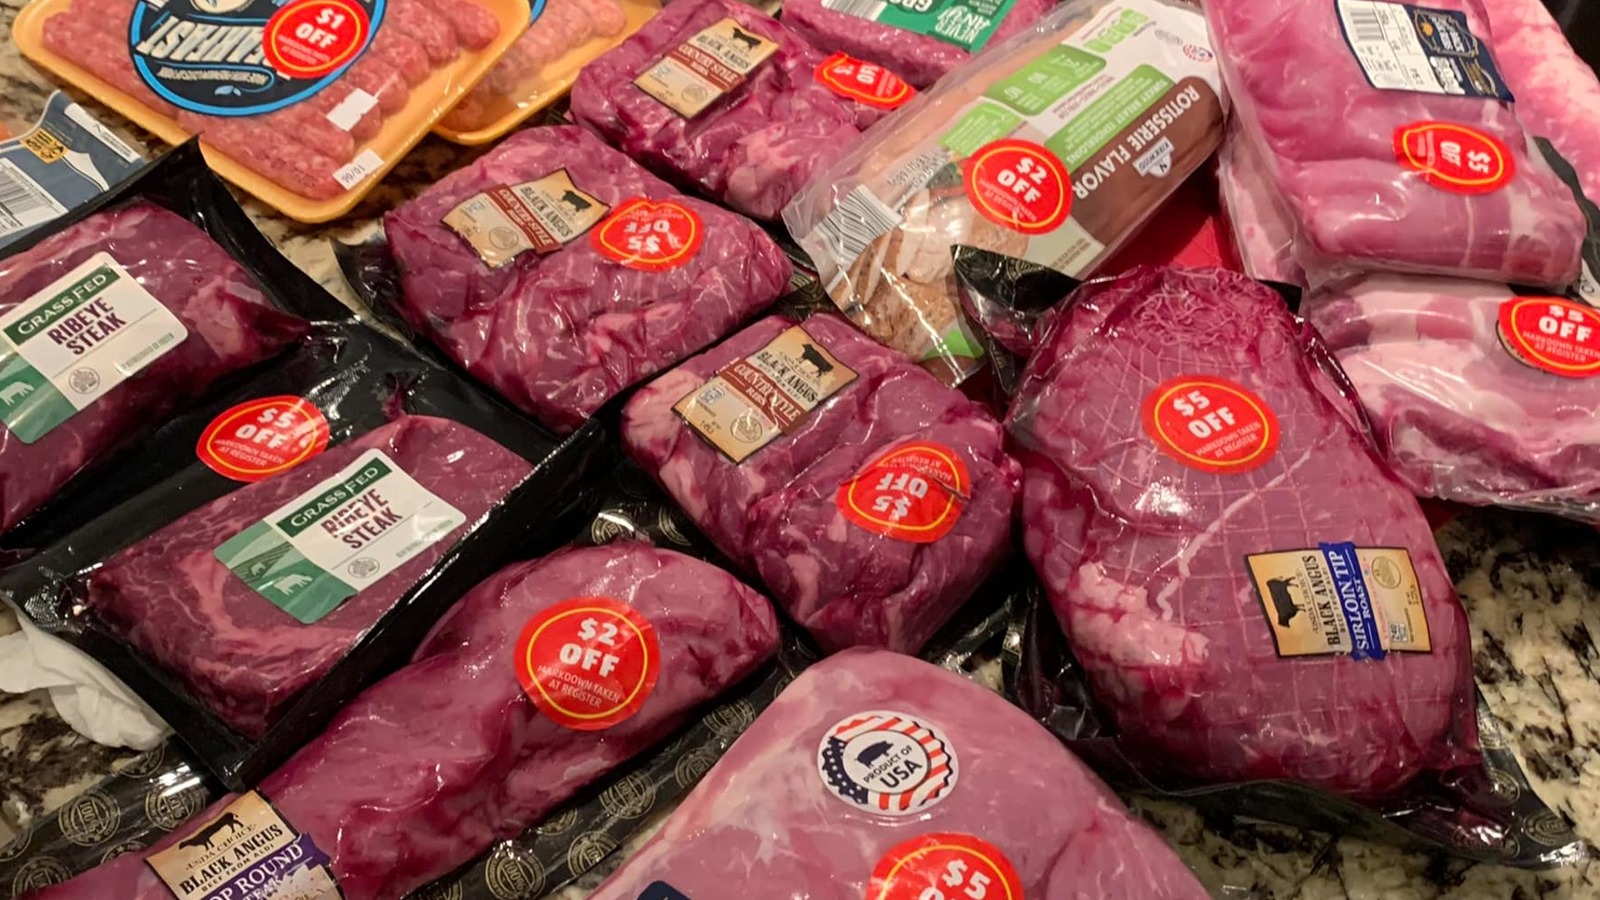 Affordable Meat Discounts